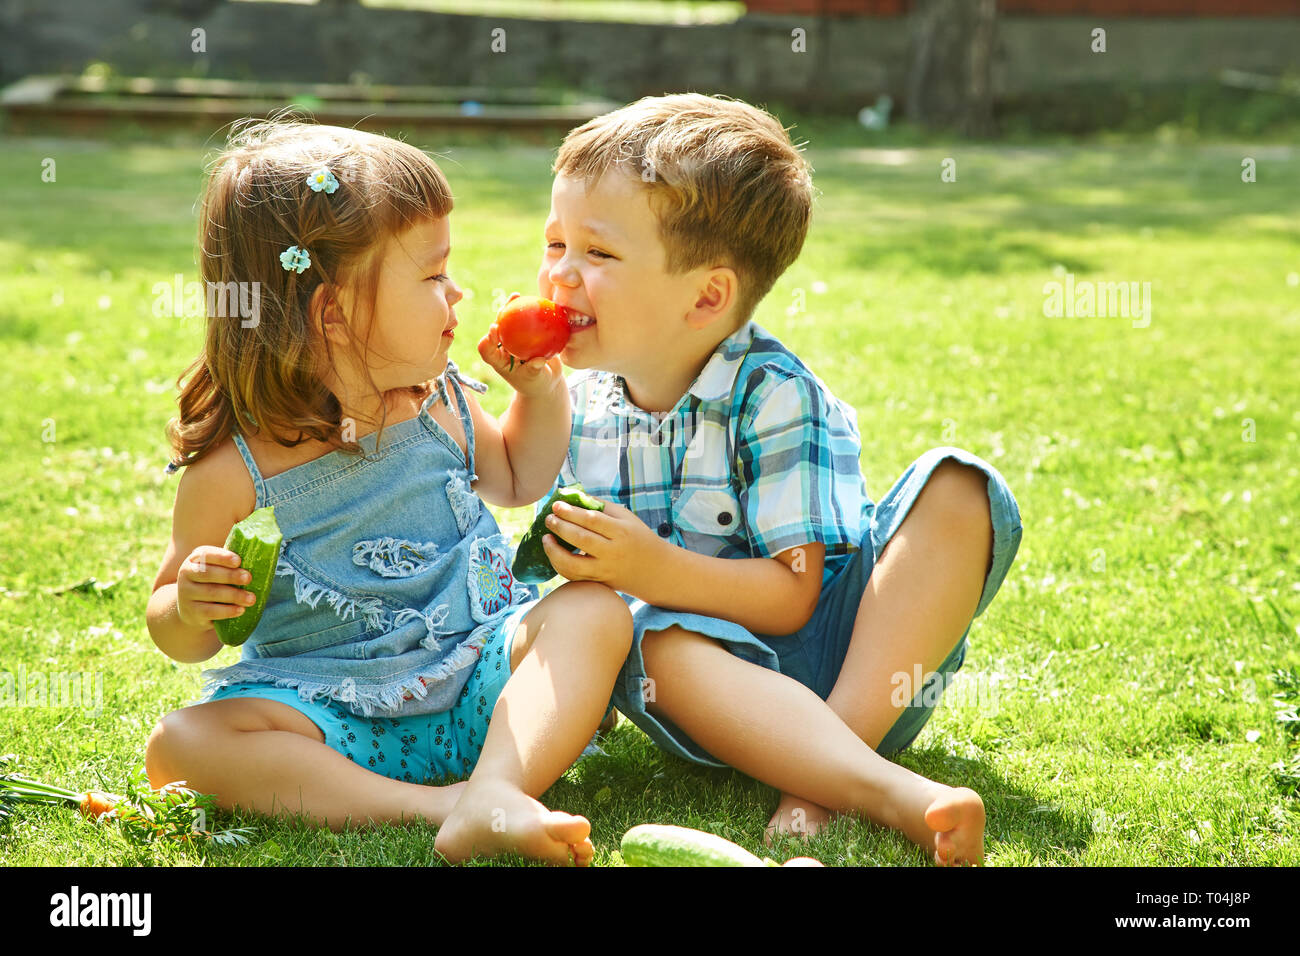 children outdoors in the summer. brother and sister eating vegetables Stock Photo